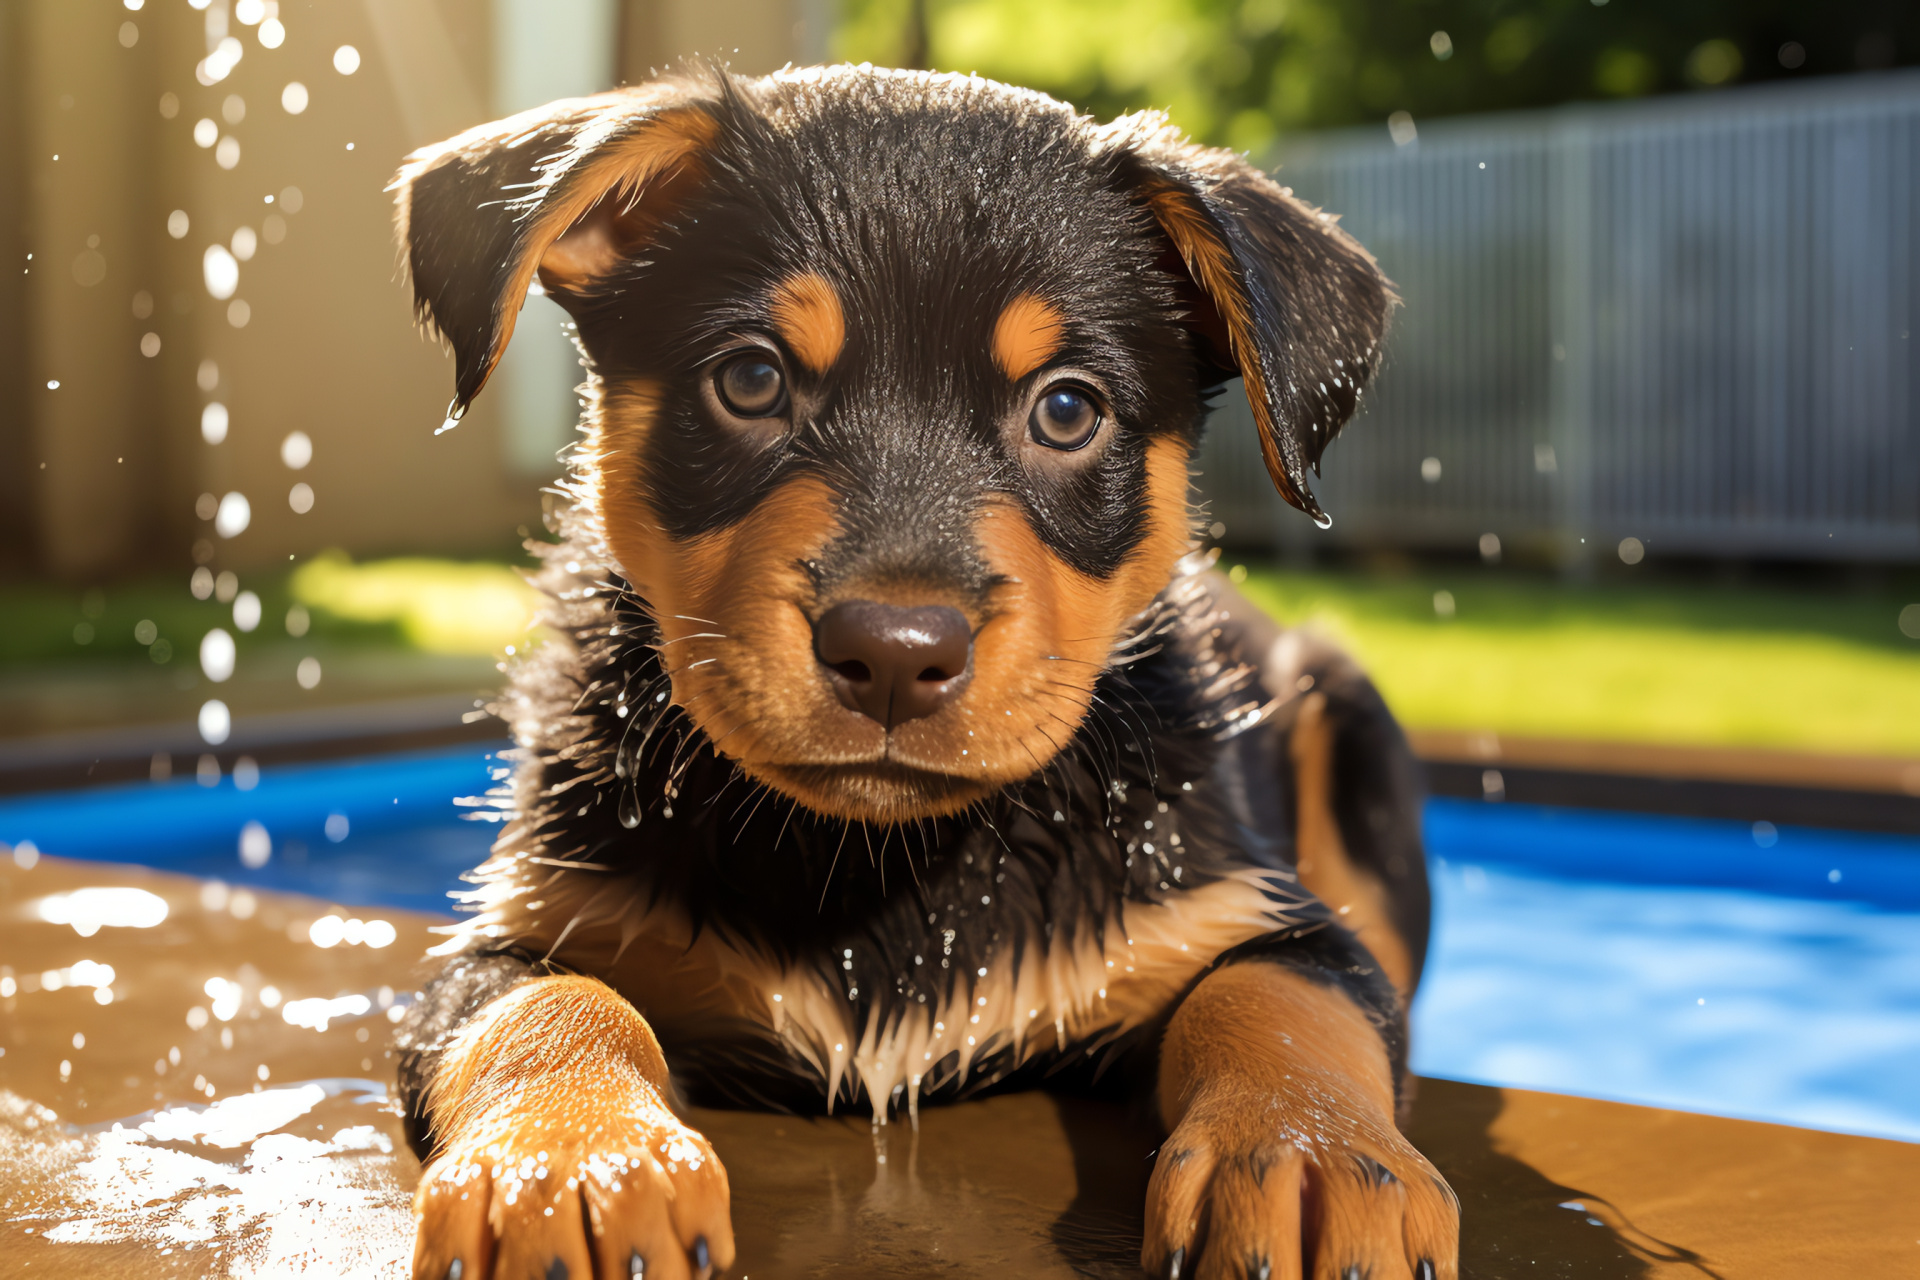 Rottweiler puppy eyes, youthful canines, contrasting fur, tactile imagery, distinctive markings, HD Desktop Image